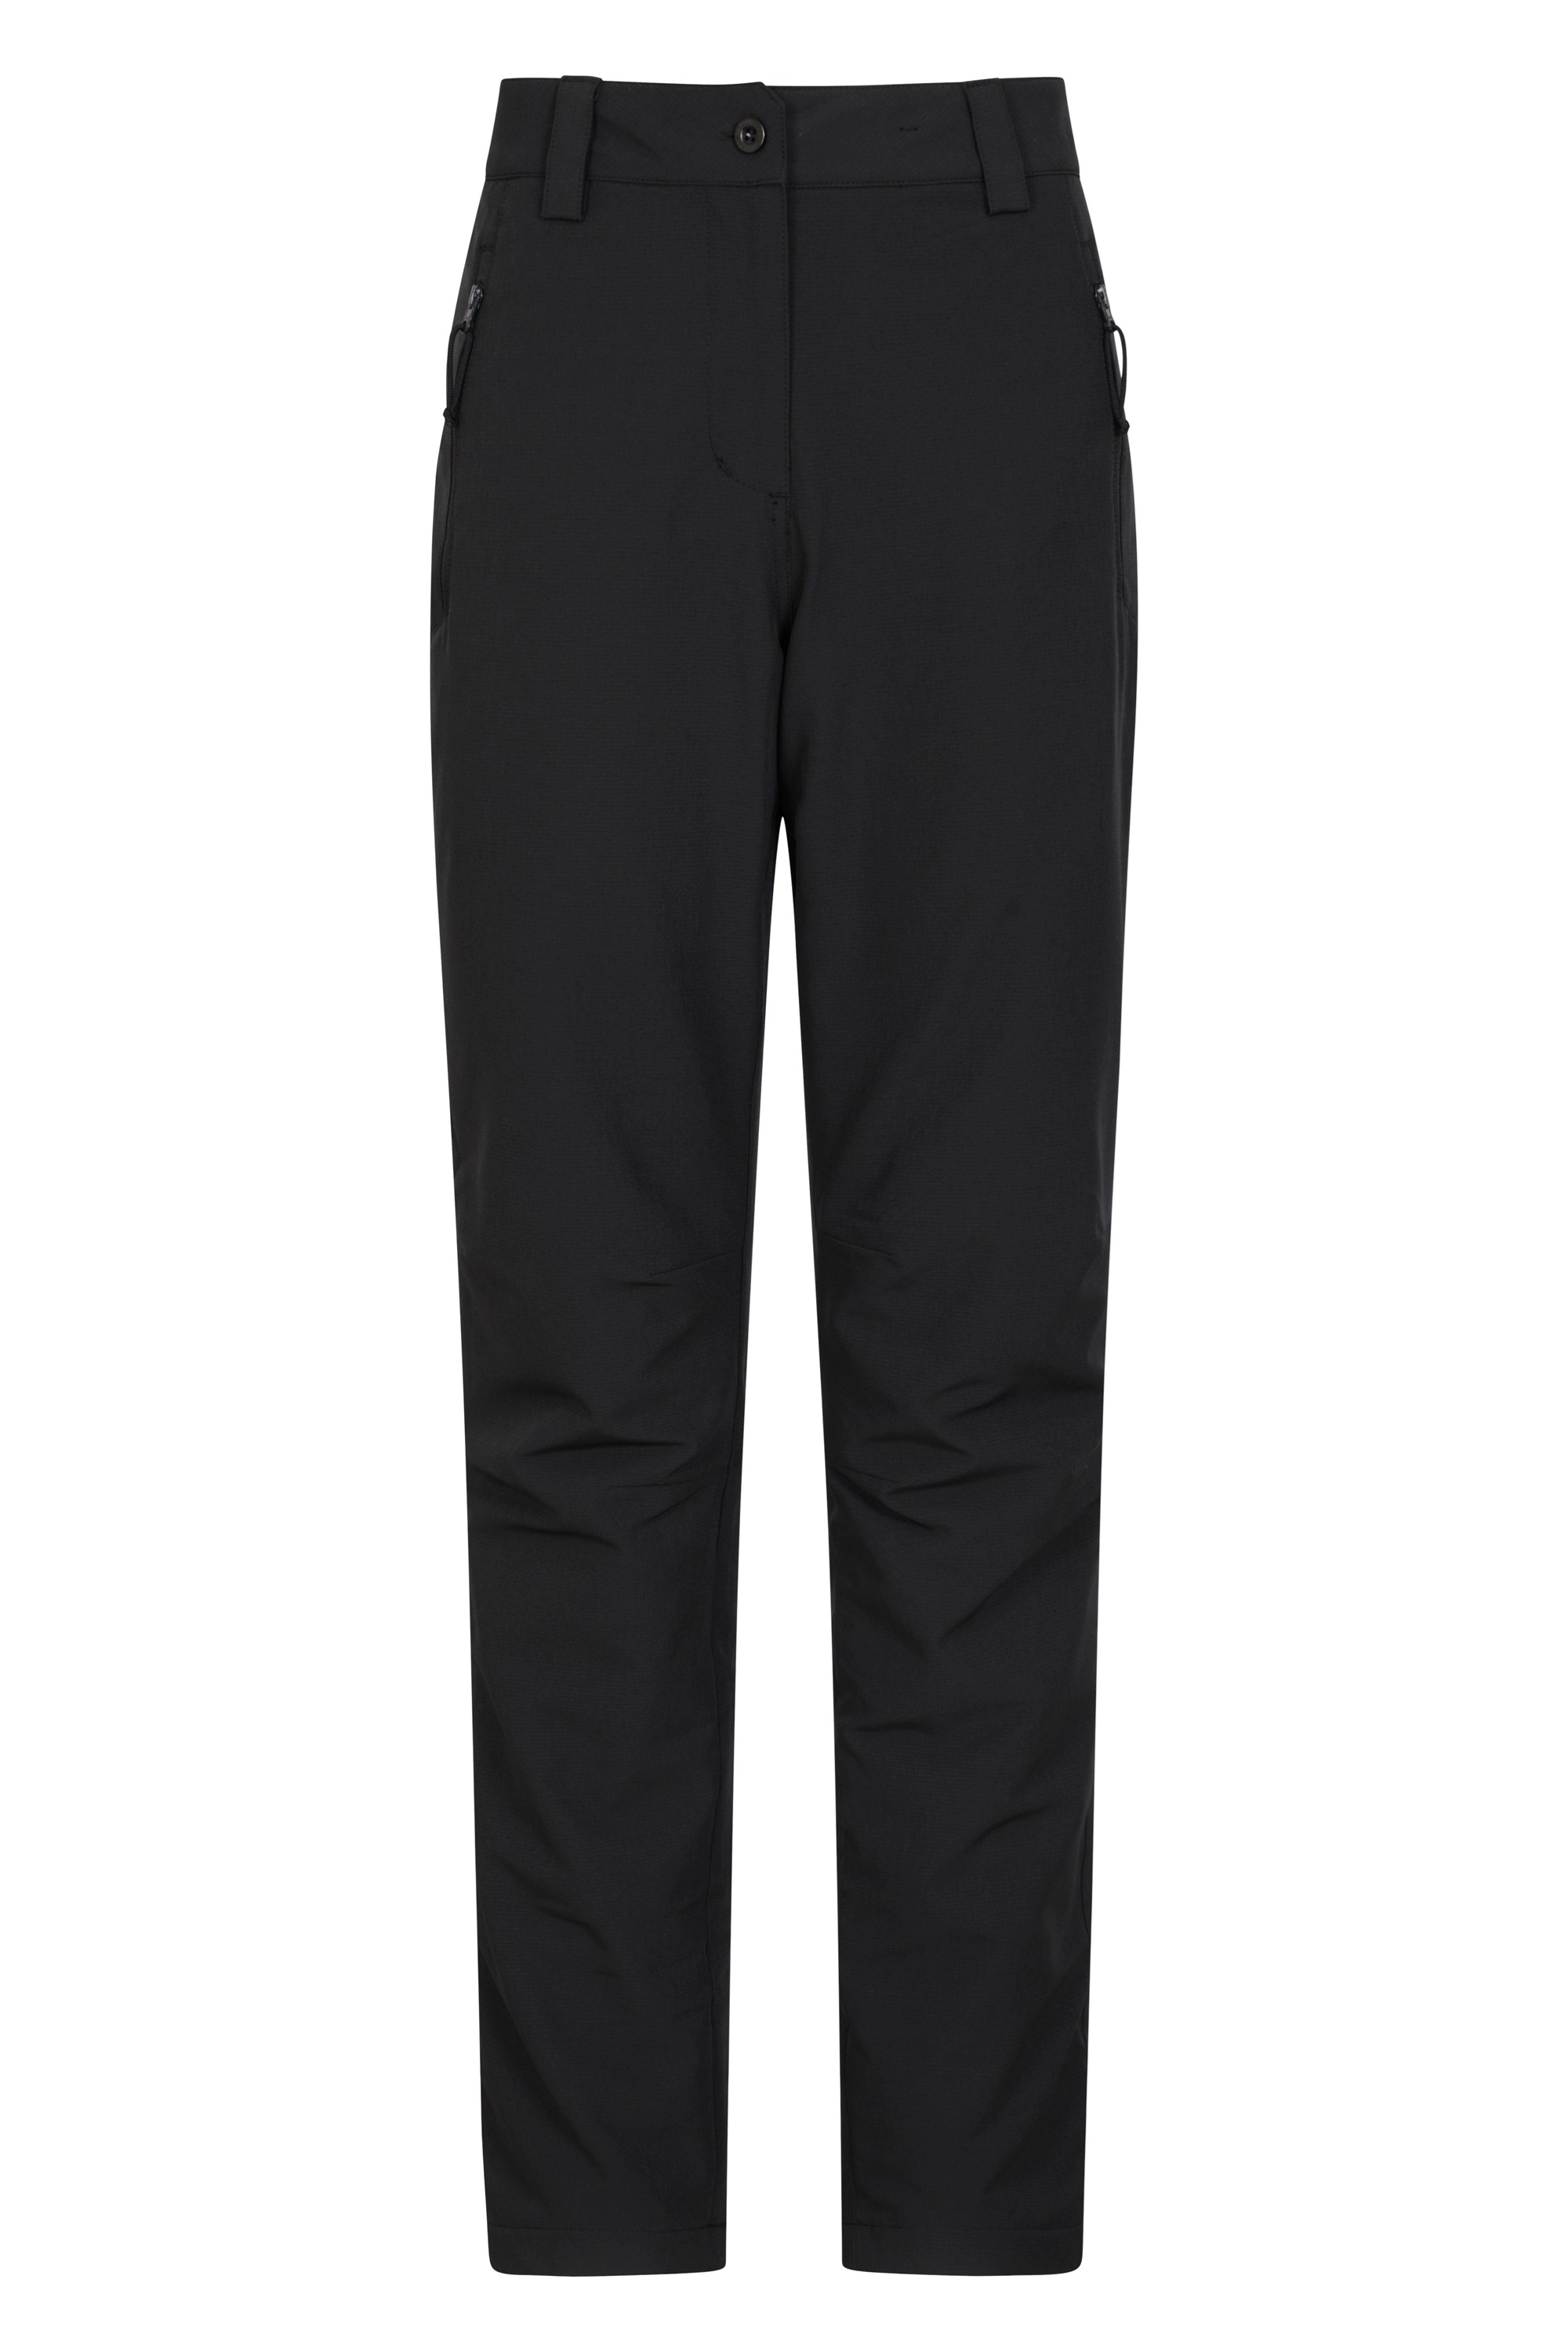 Arctic II Womens Thermal Fleece Lined Trousers Short Length Black